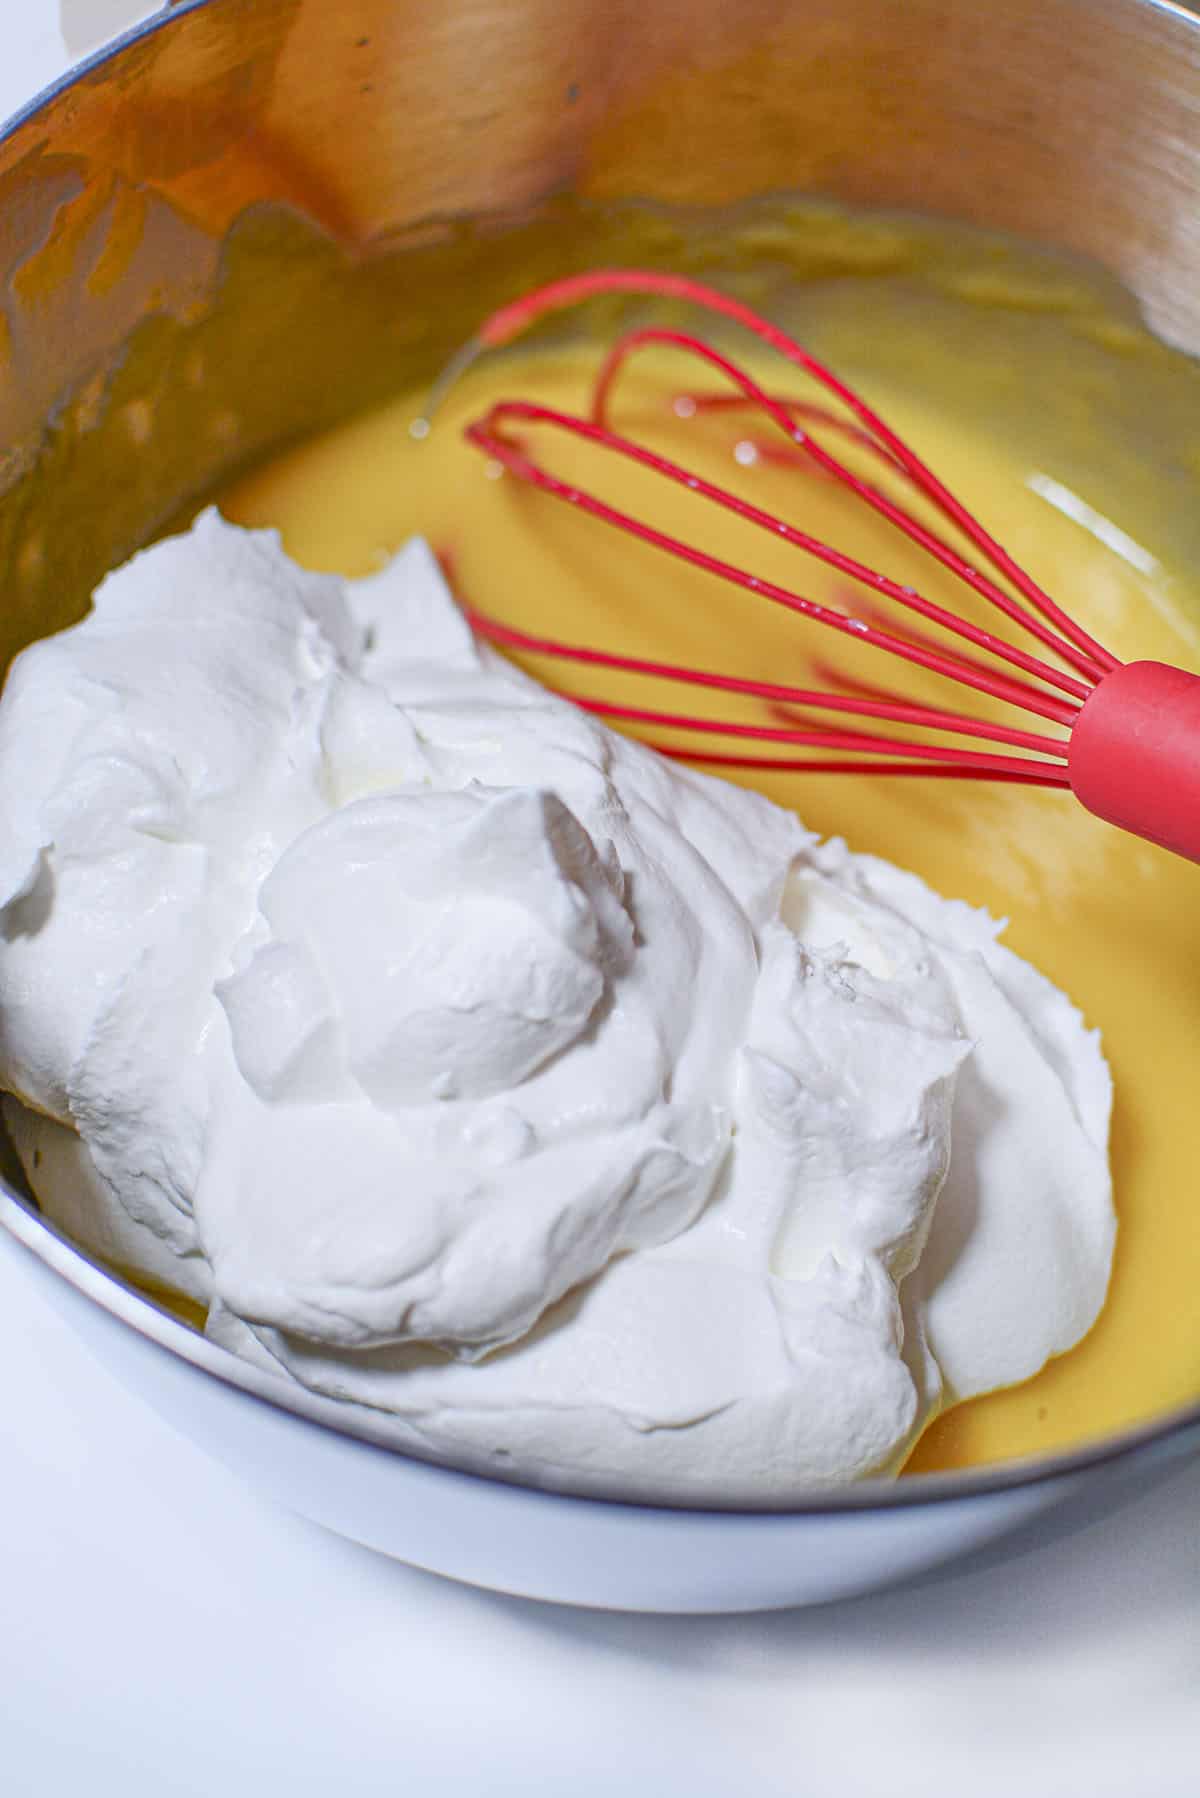 Whipped cream is about to be folded into the eggnog pudding. There is a large red whisk next to the whipped cream.